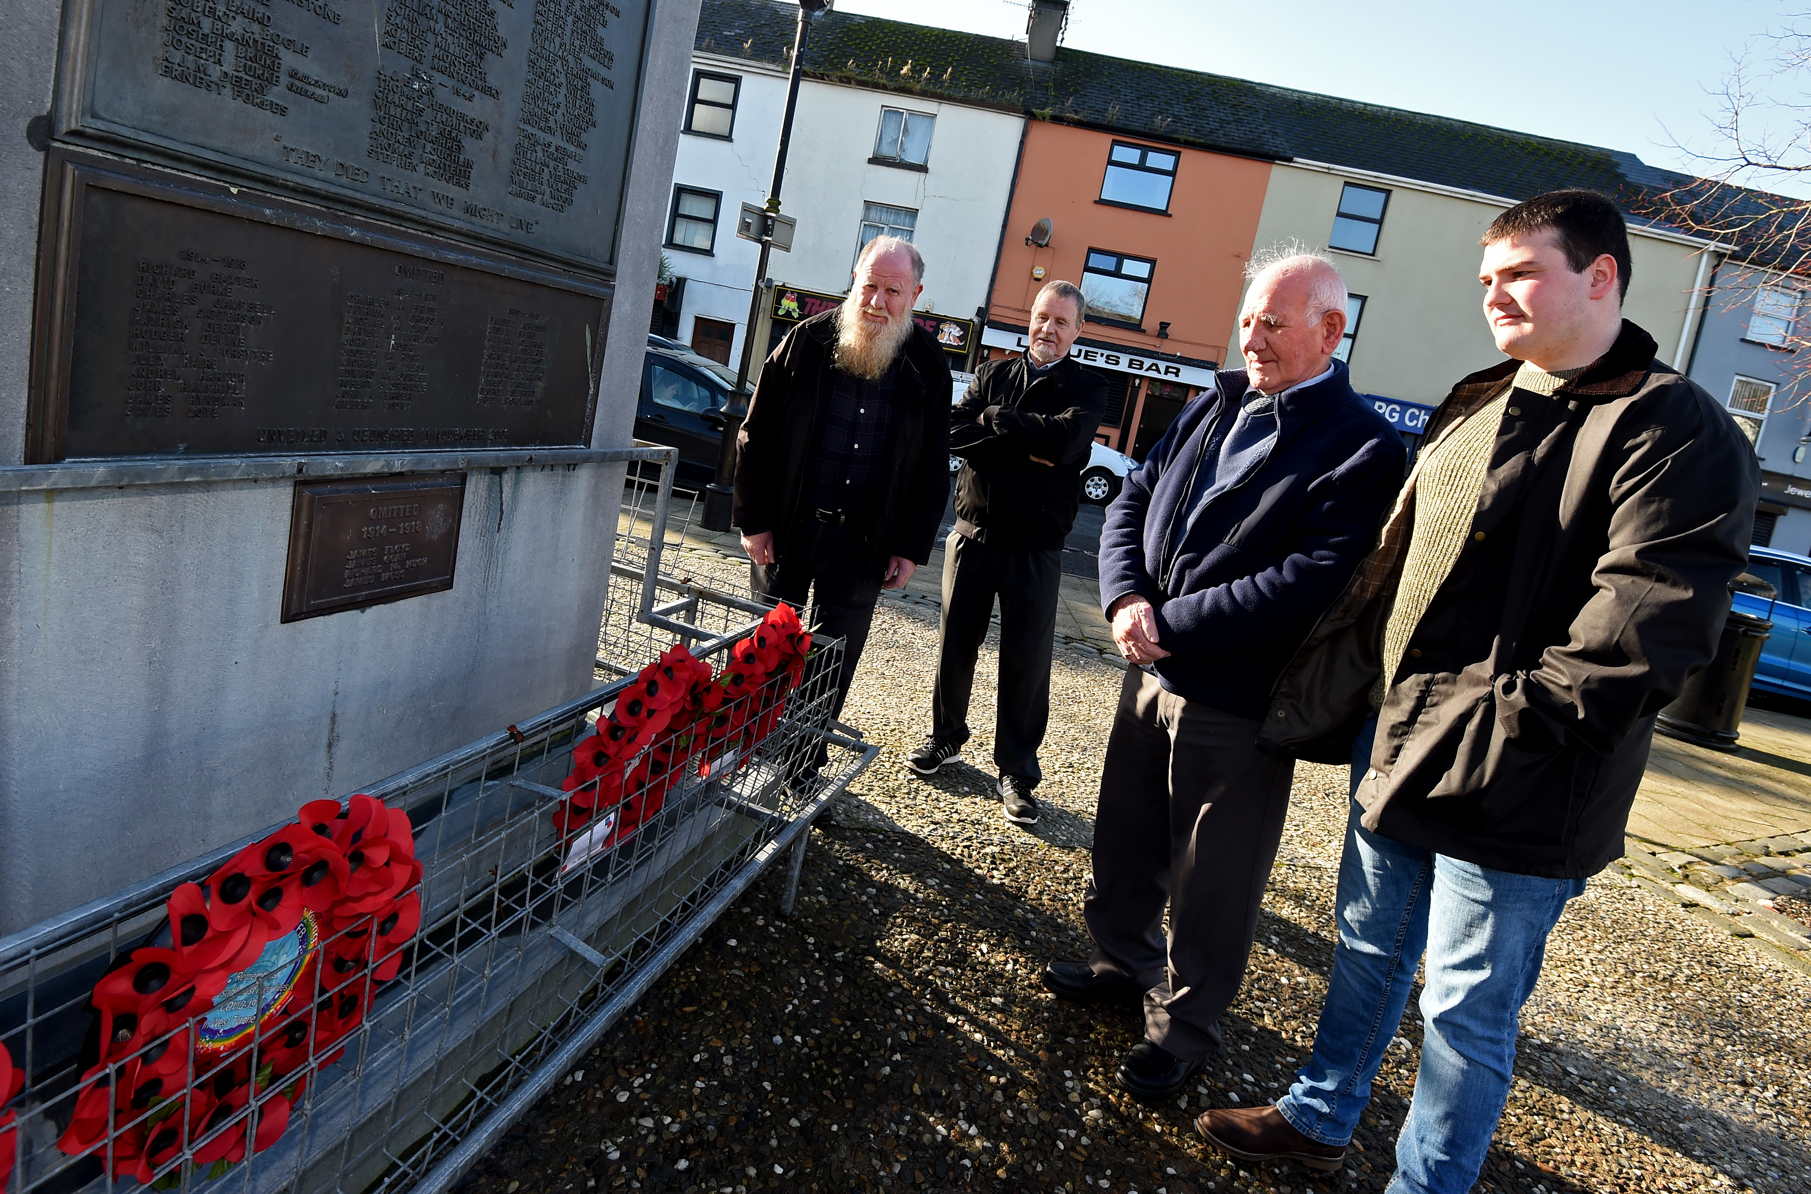 ‘Proud’ to see soldier’s name added to war memorial